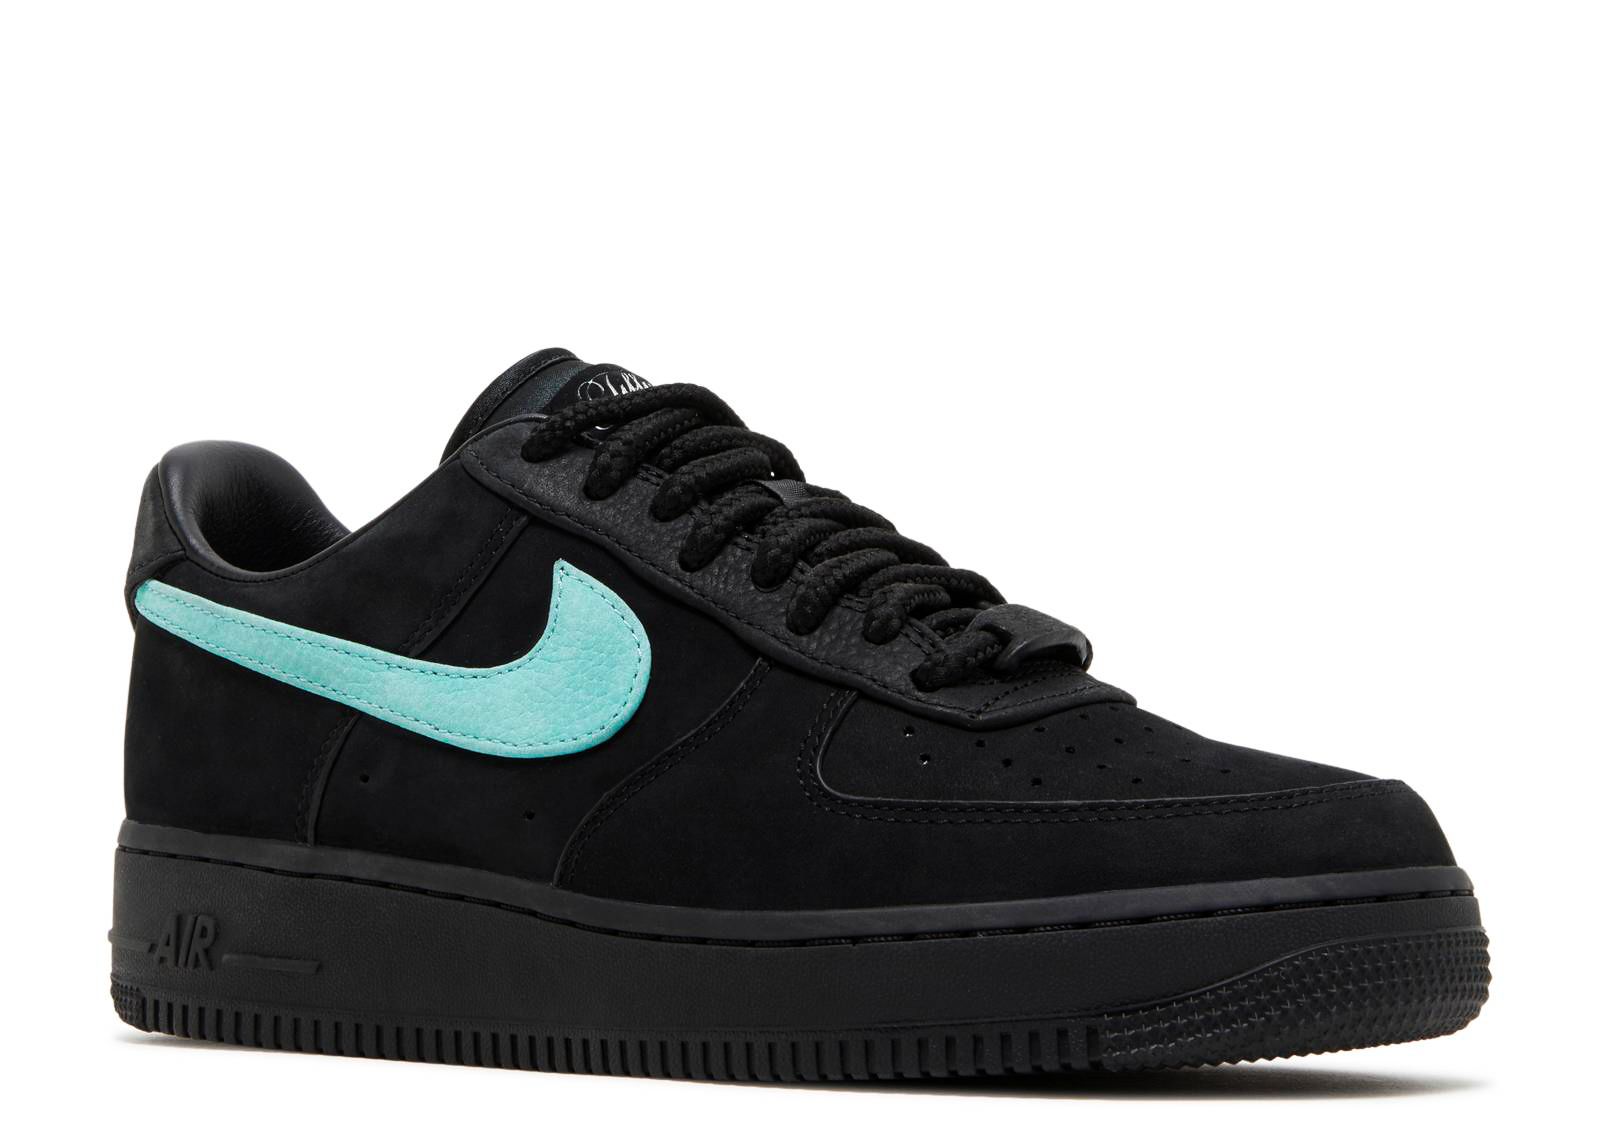 Nike and Tiffany Reveal Reverse AF1 Colorway